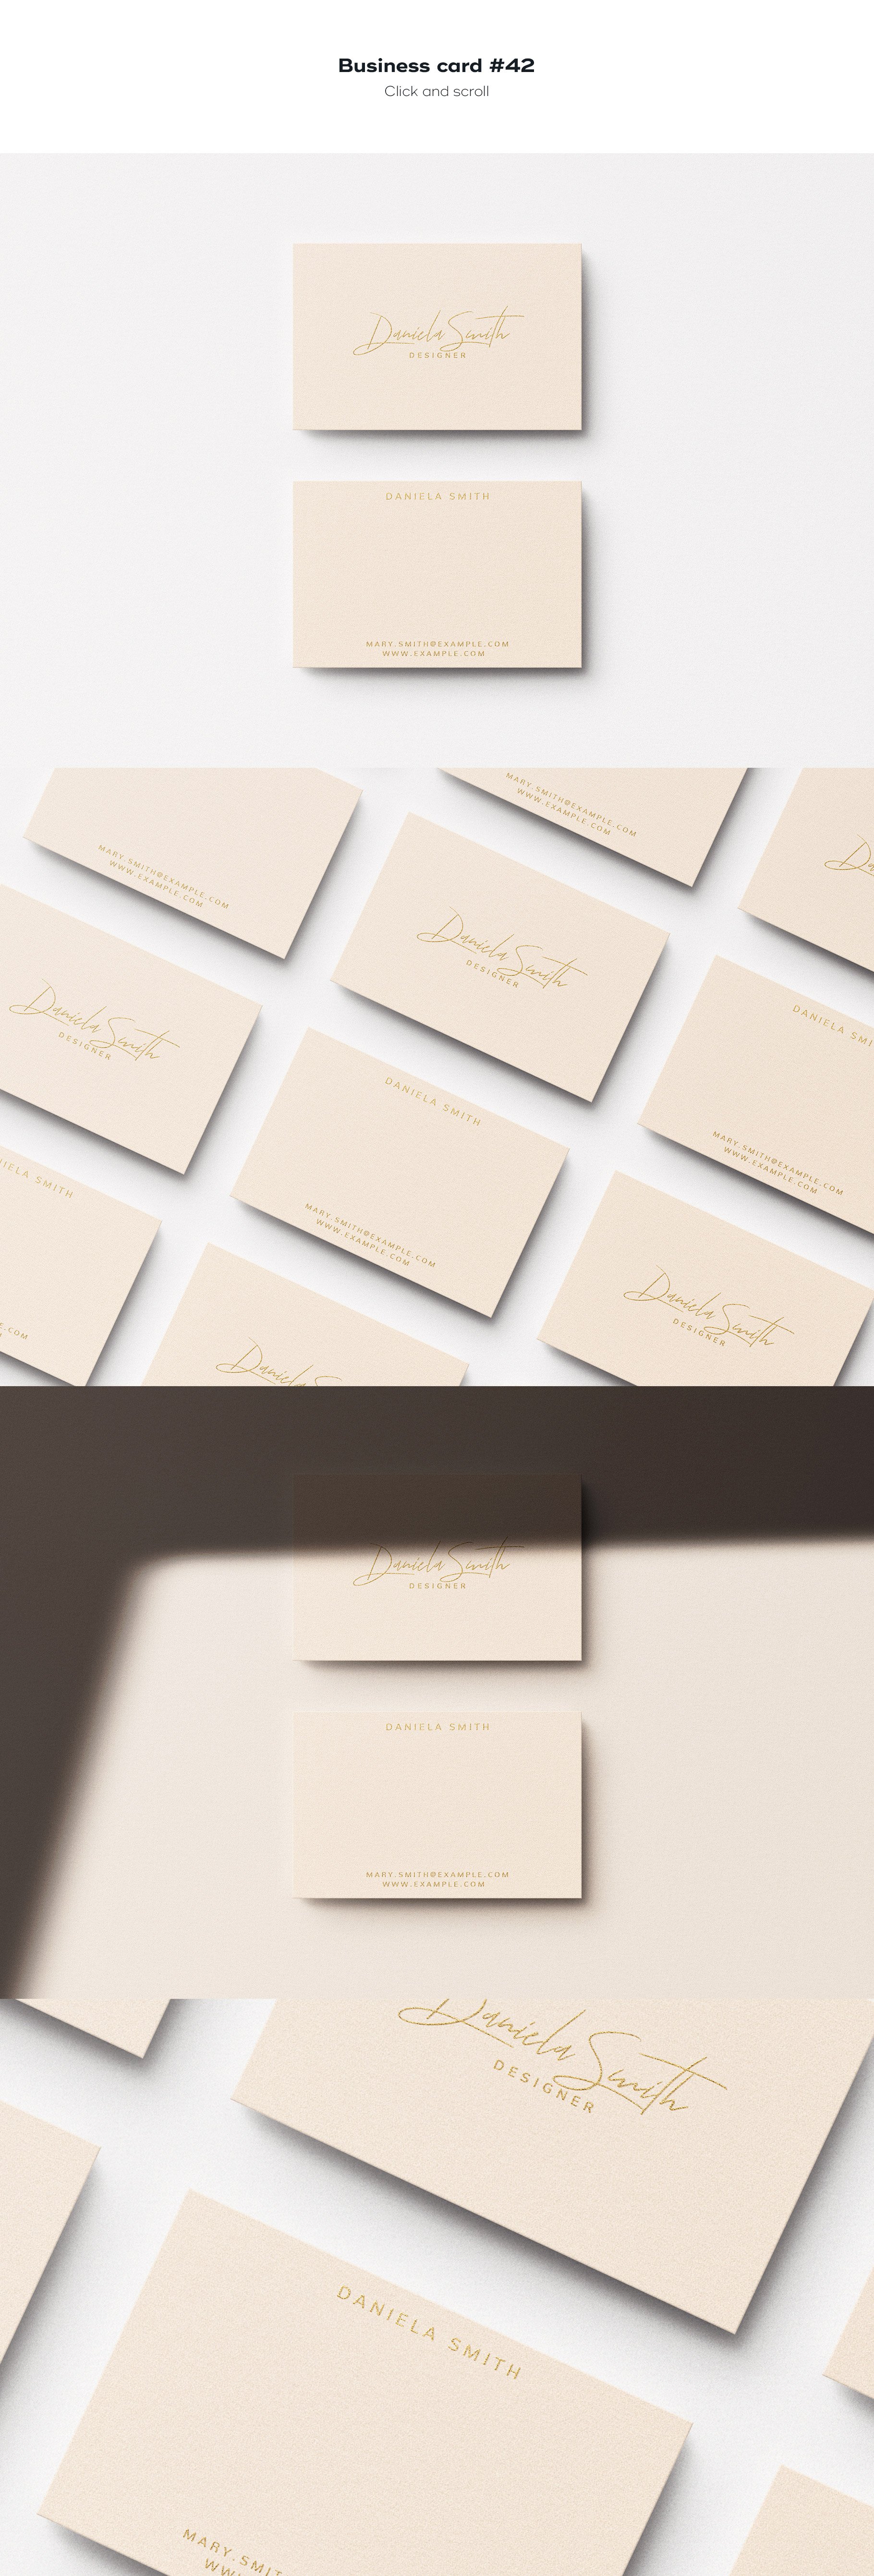 business card 42 238